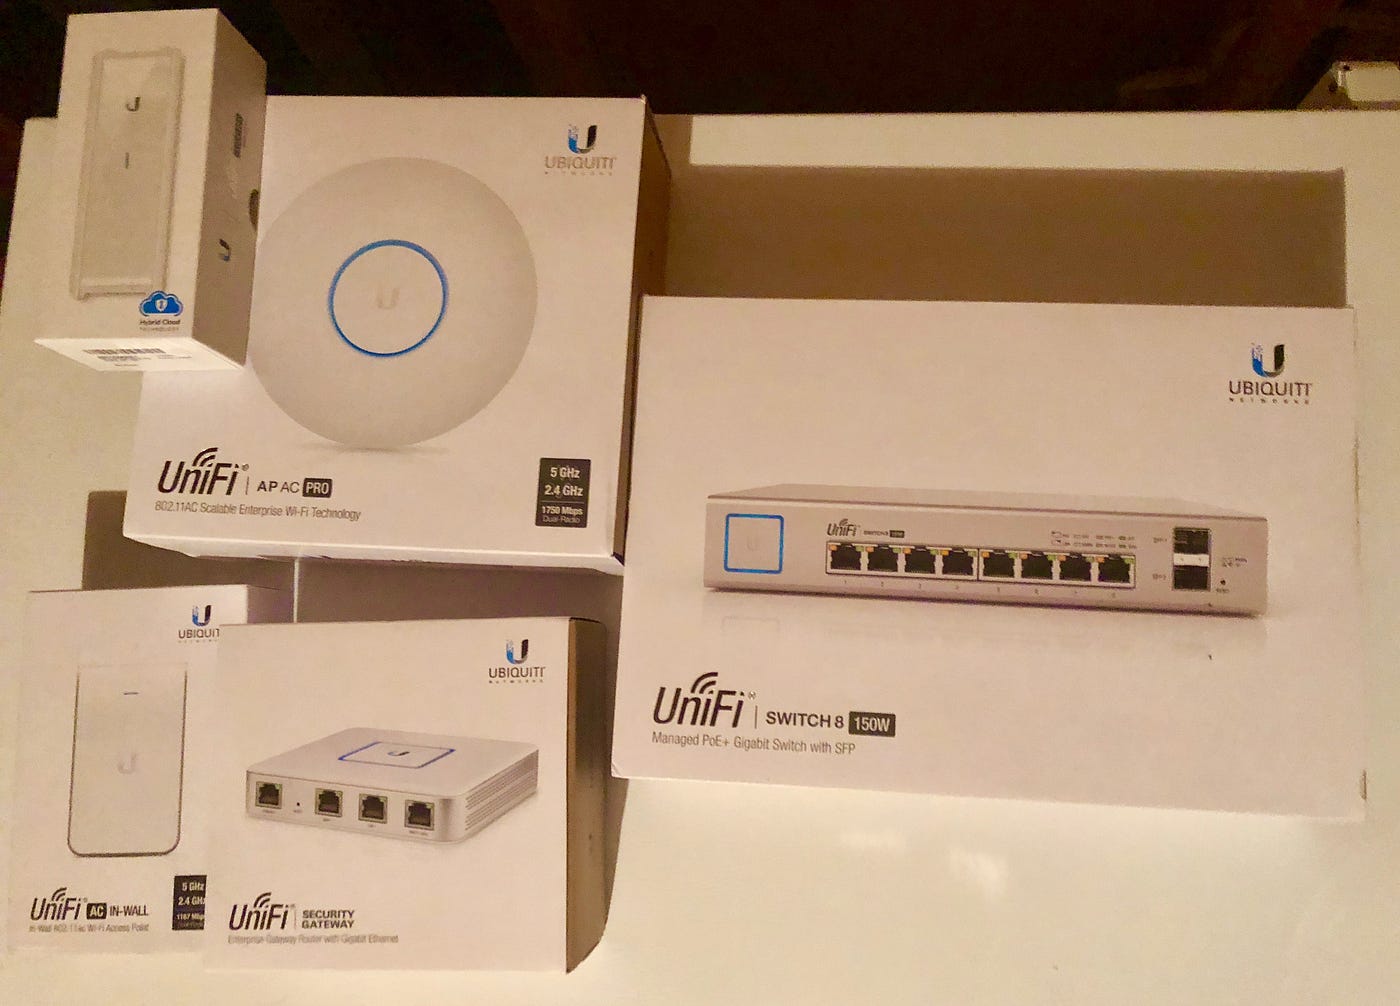 Ubiquiti UniFi Setup At Home — Impressions From a Non-Pro on Building Perfect | by Sean Miedema | Medium